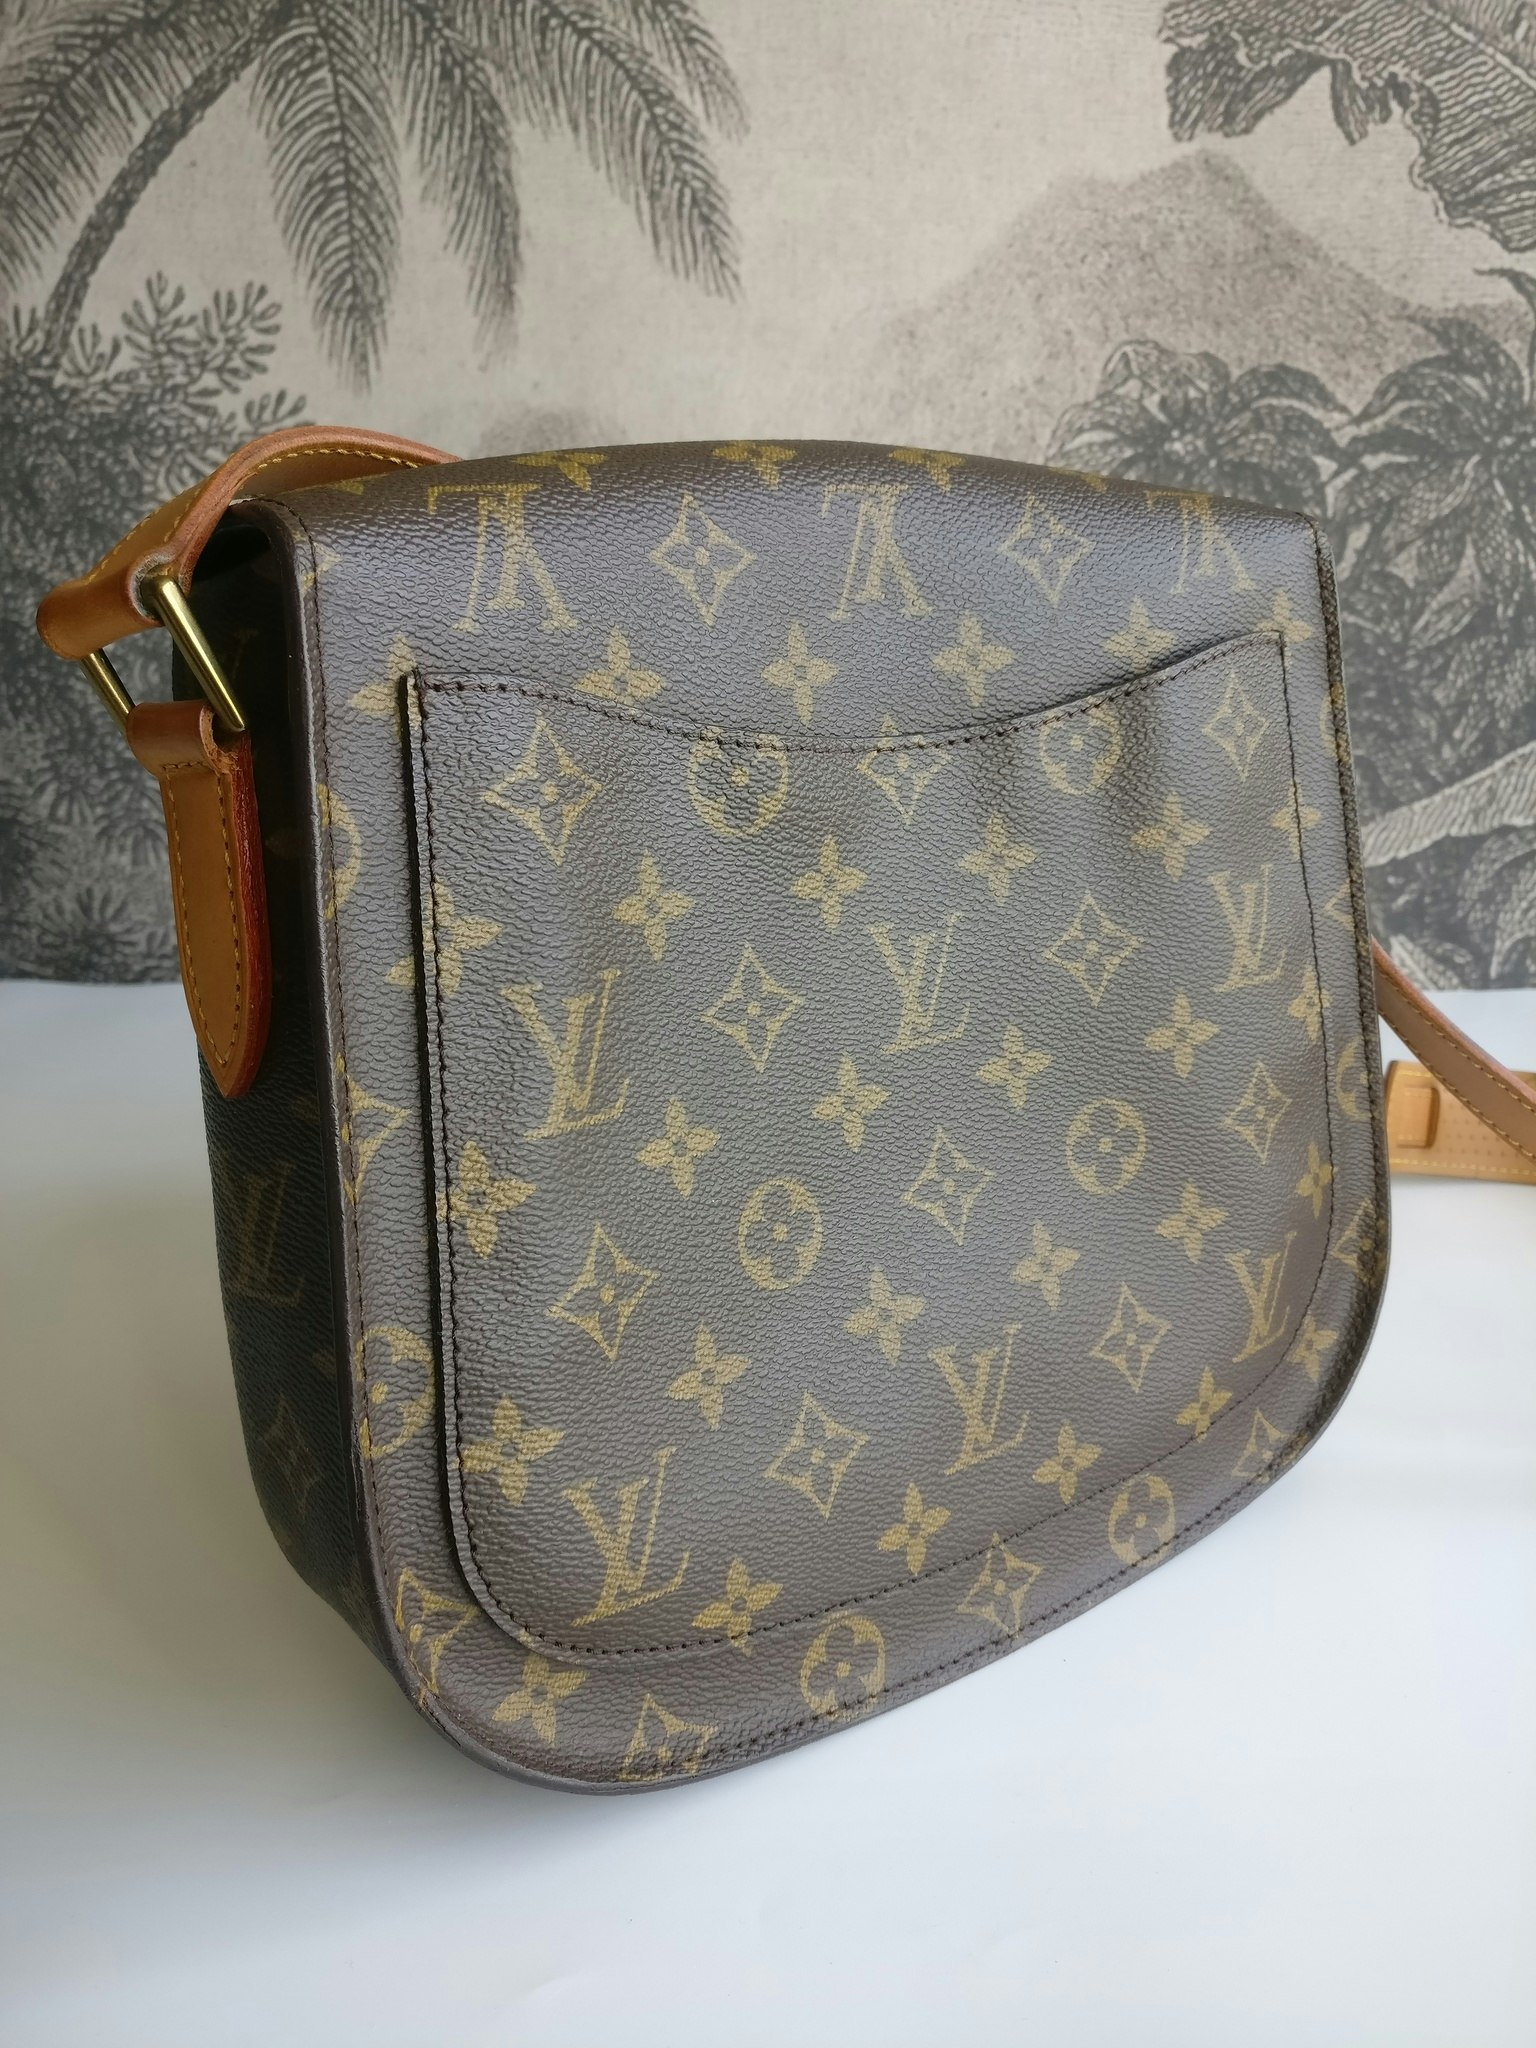 Louis Vuitton Saint Cloud GM … $719 This bag is available at the